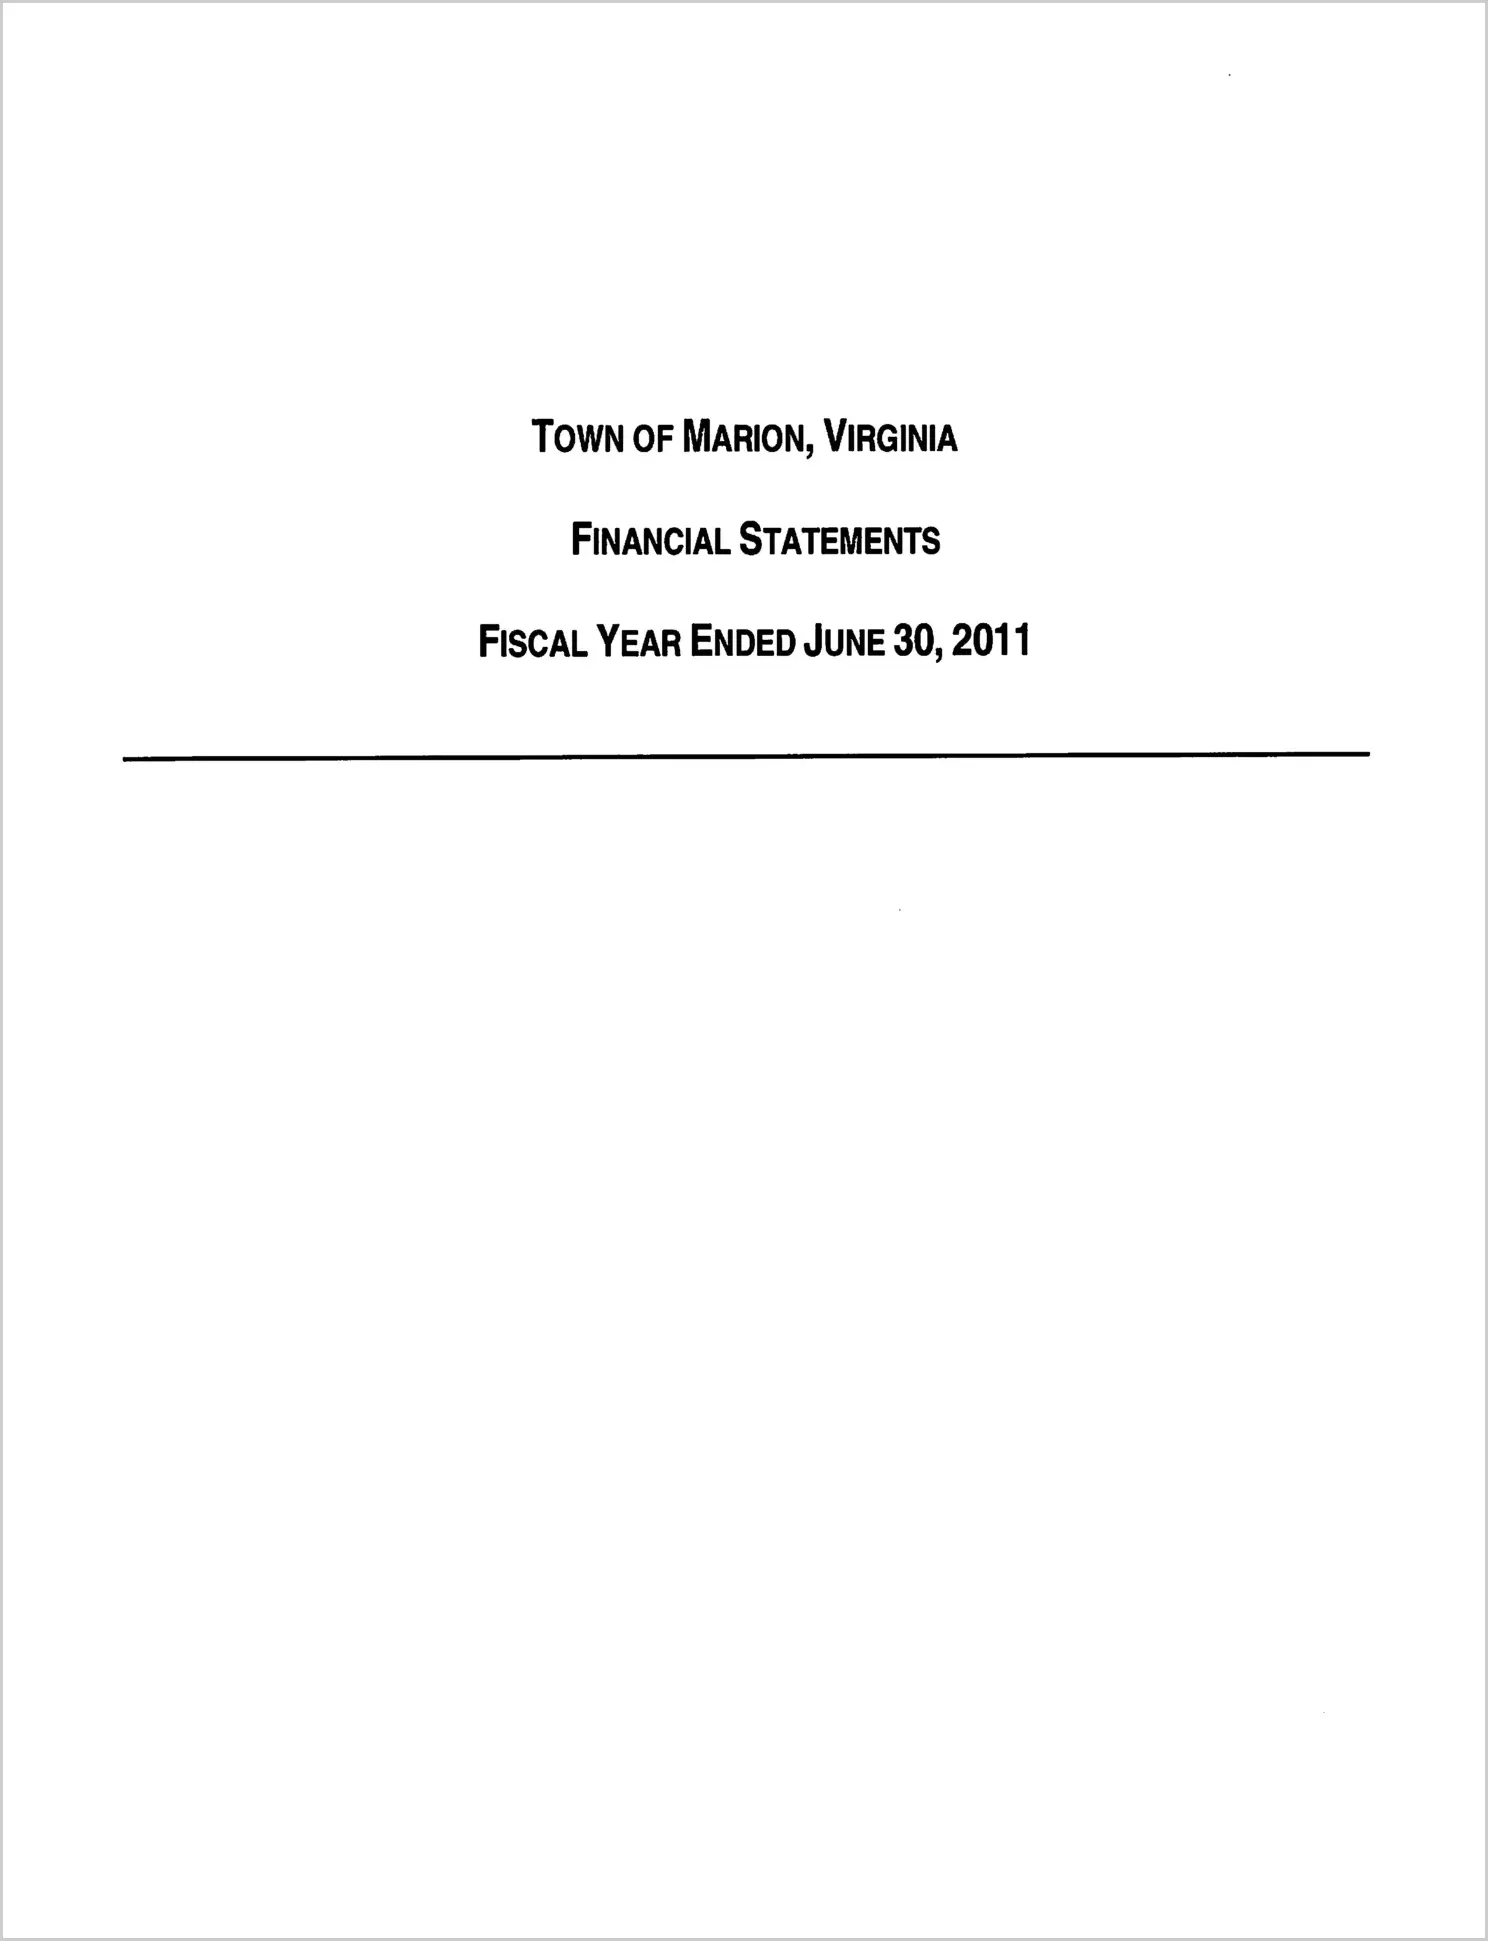 2011 Annual Financial Report for Town of Marion